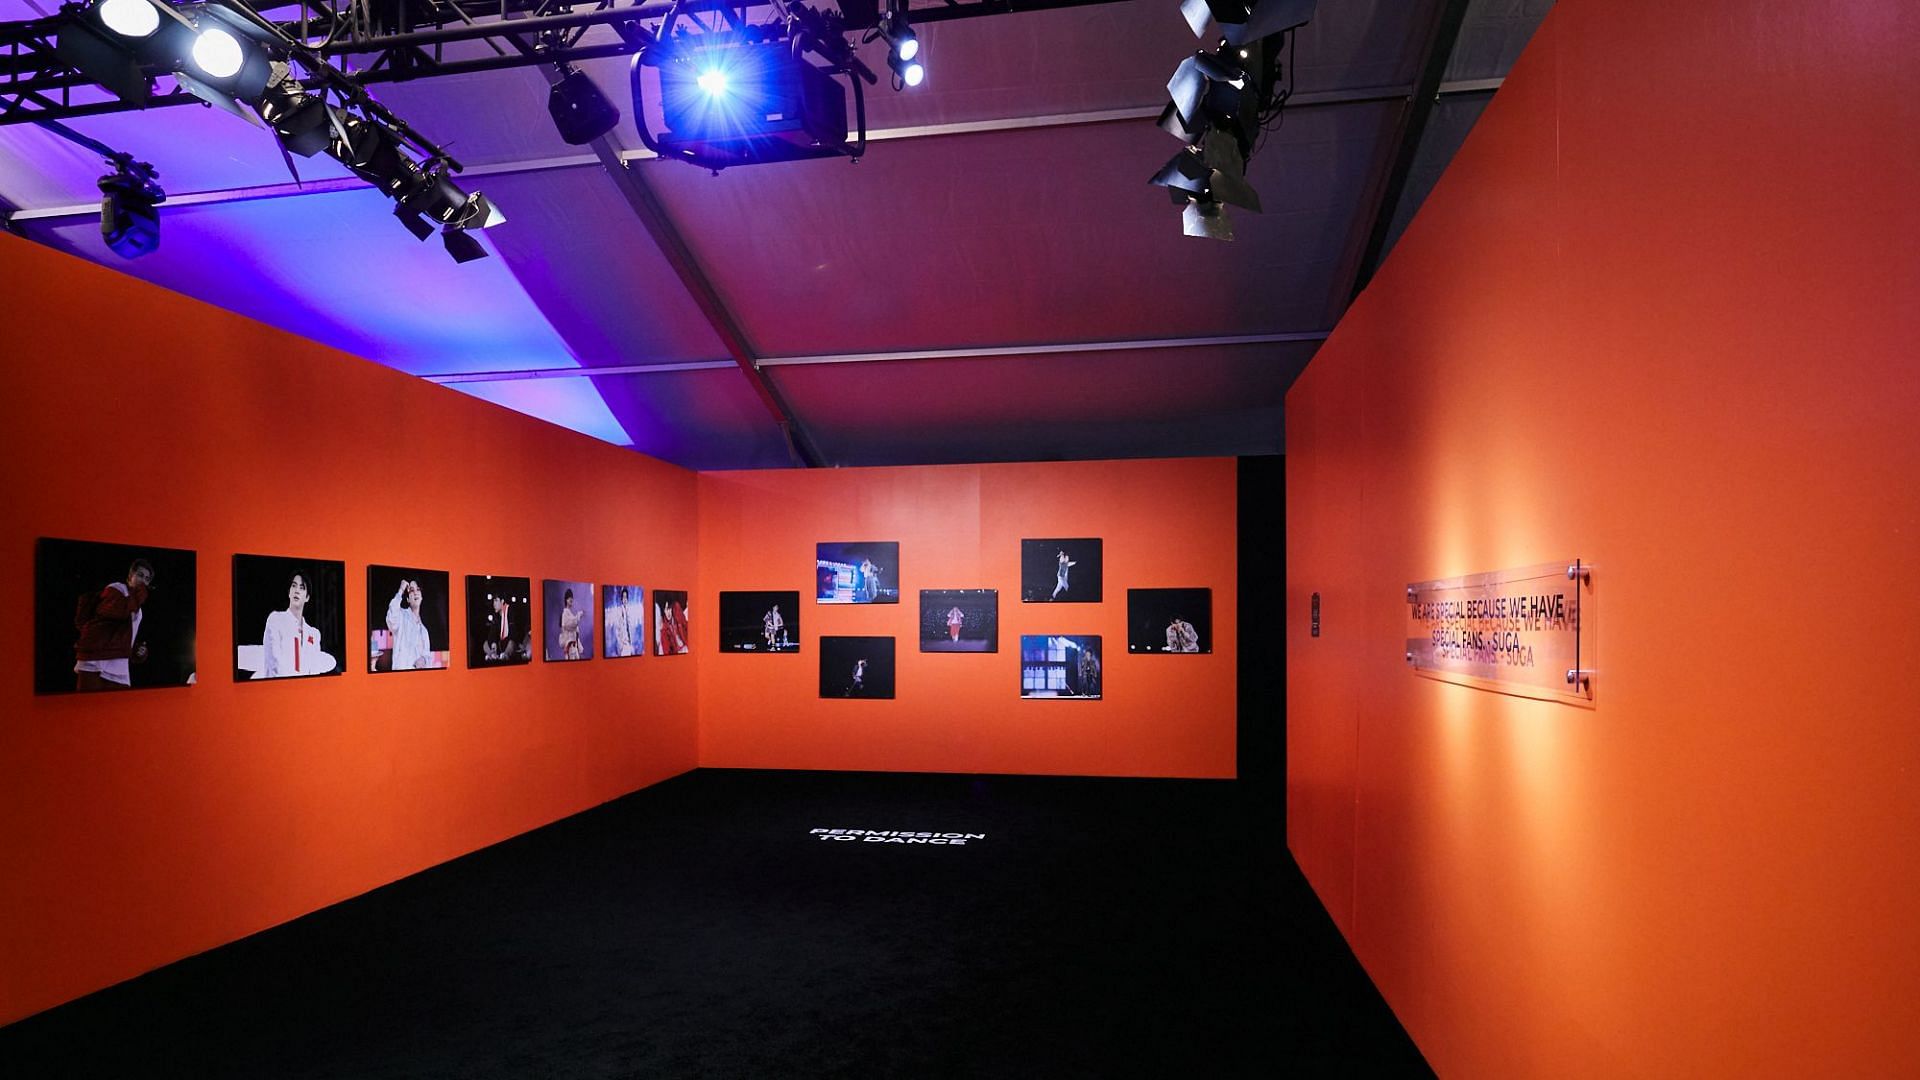 PTD photo exhibition, Behind The Stage (Image via HYBE Corp.)